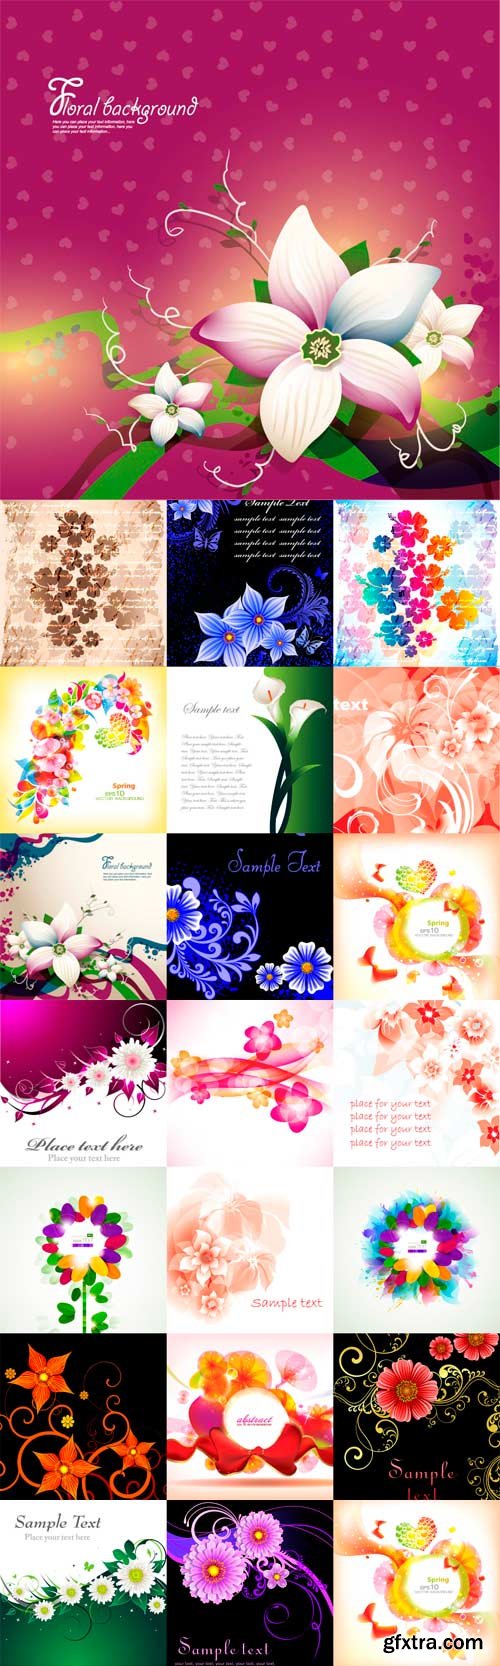 Vector beautiful flowers backgrounds - 2